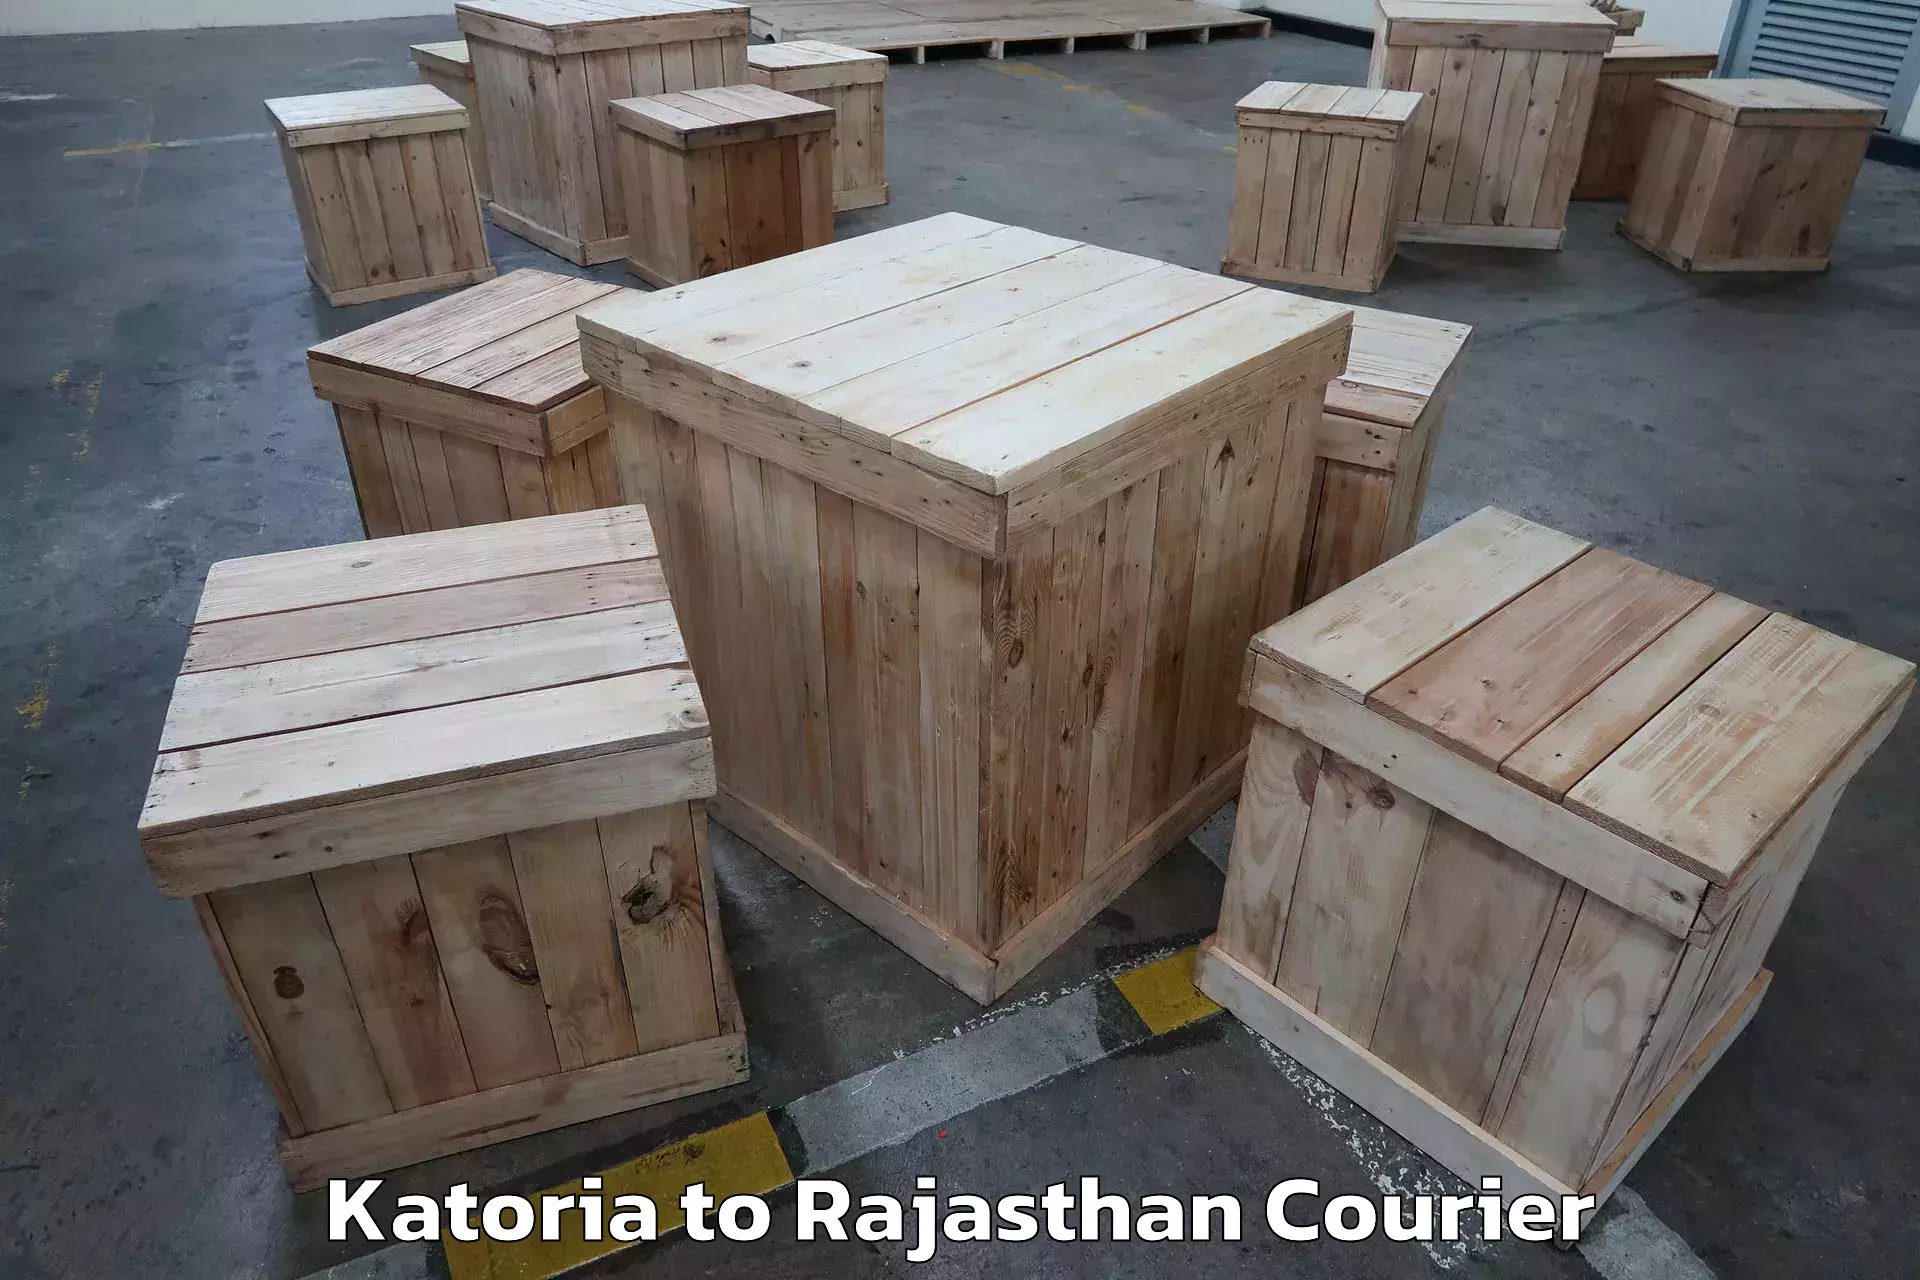 Trusted moving company Katoria to Rajasthan